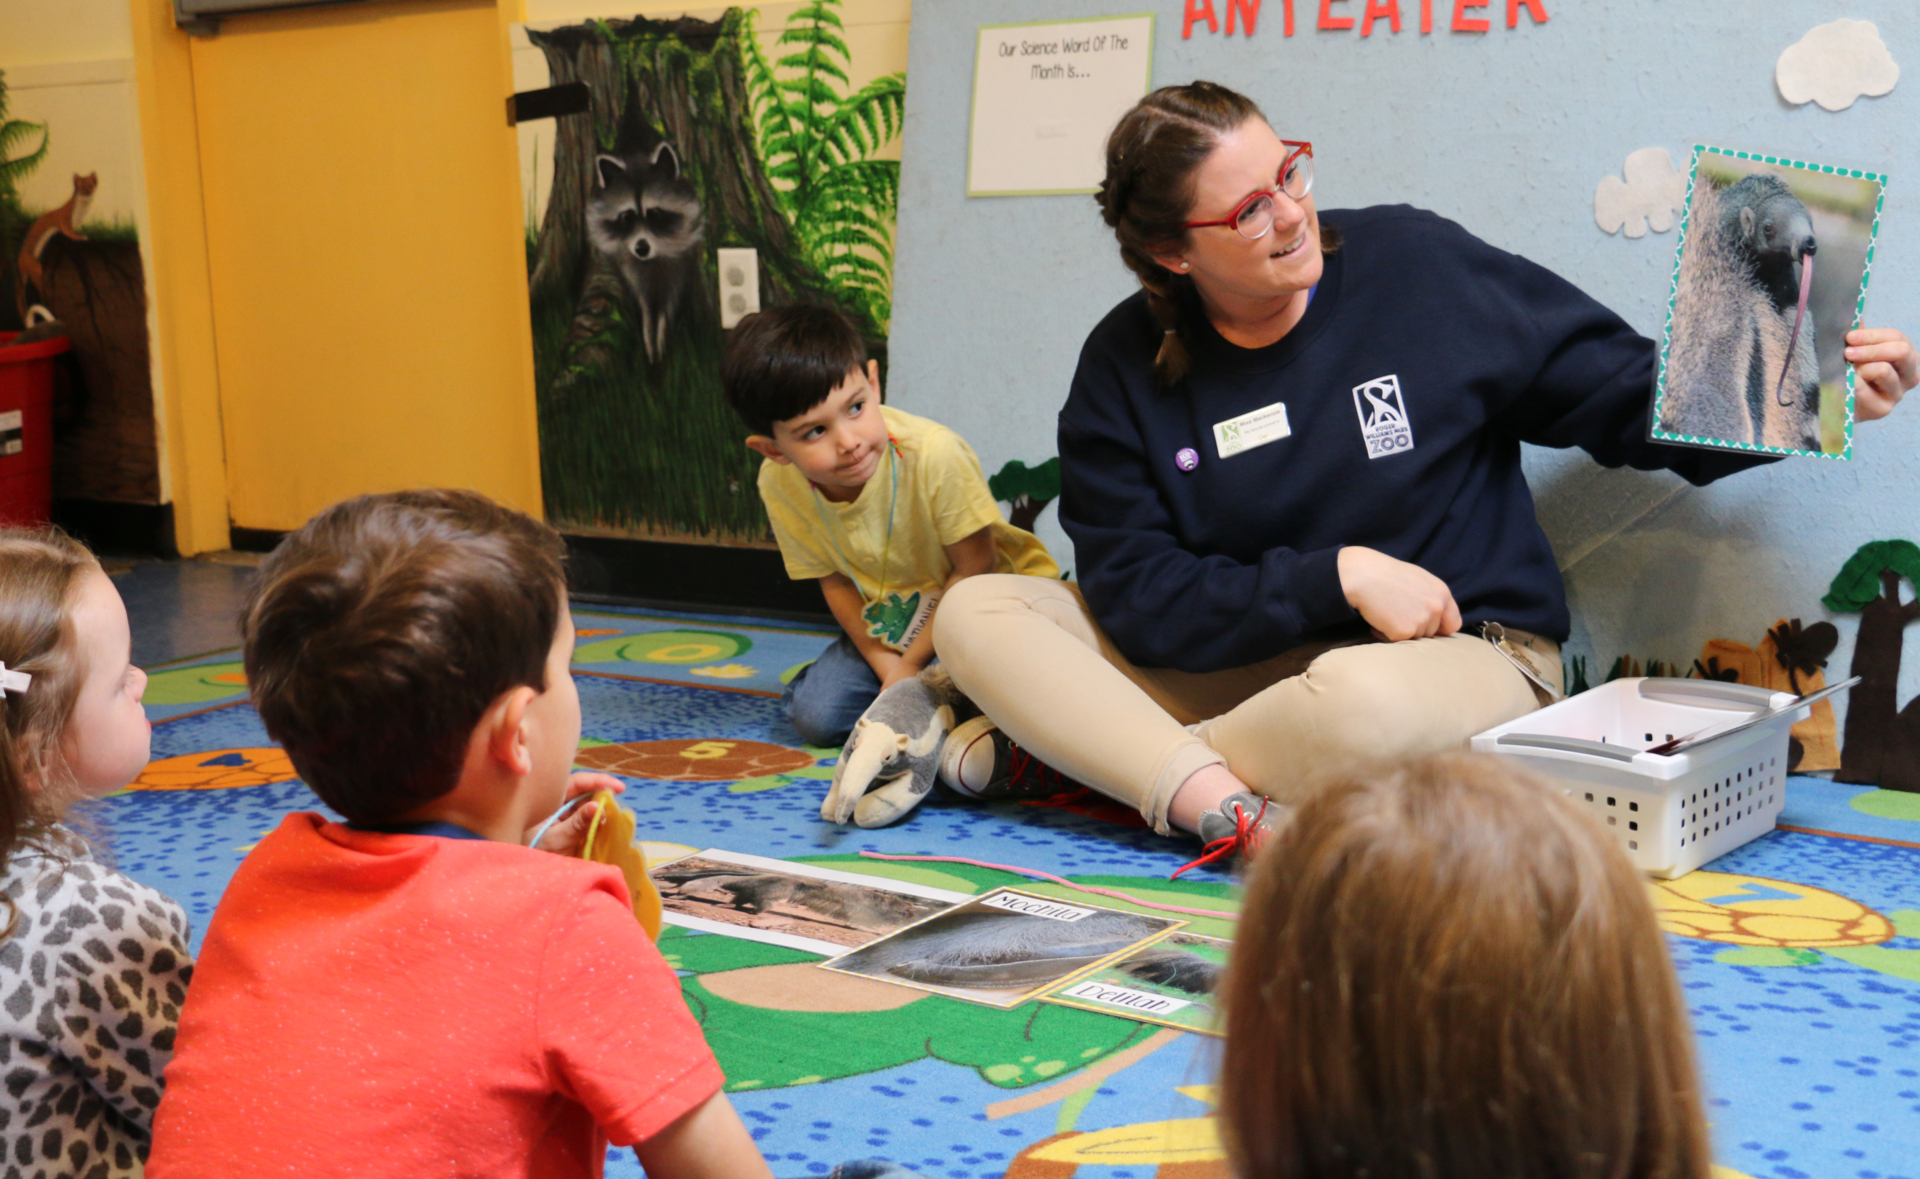 Zoo Education Staff during early childhood program showing a picture of an anteater to four children.